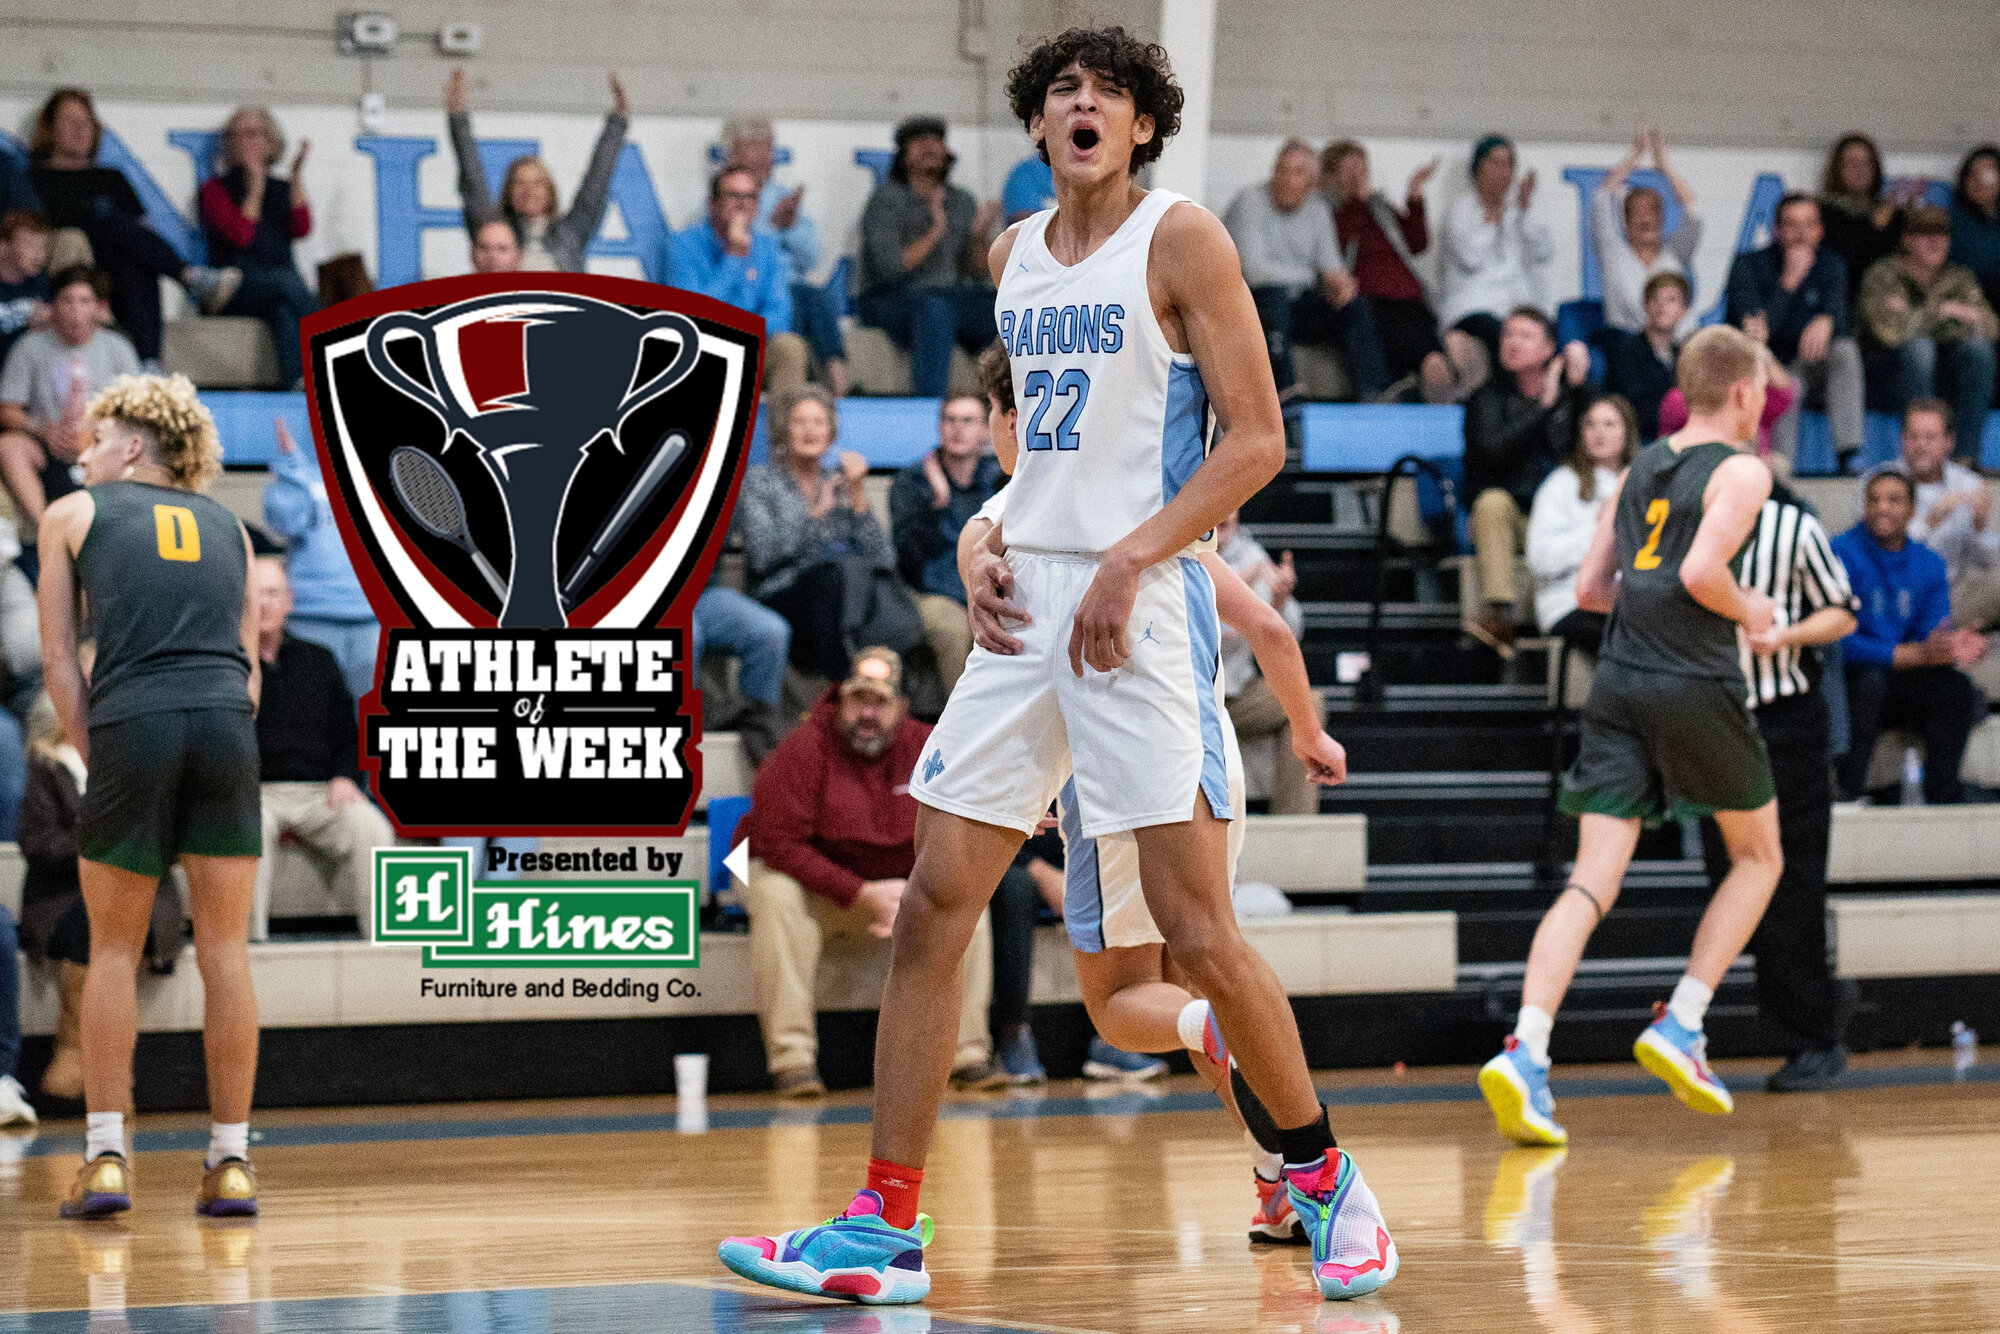 Wilson Hall's Daniel Burton averaged a double-double in three Baron victories last week, earning the Hines Furniture Athlete of the Week honors in the process.